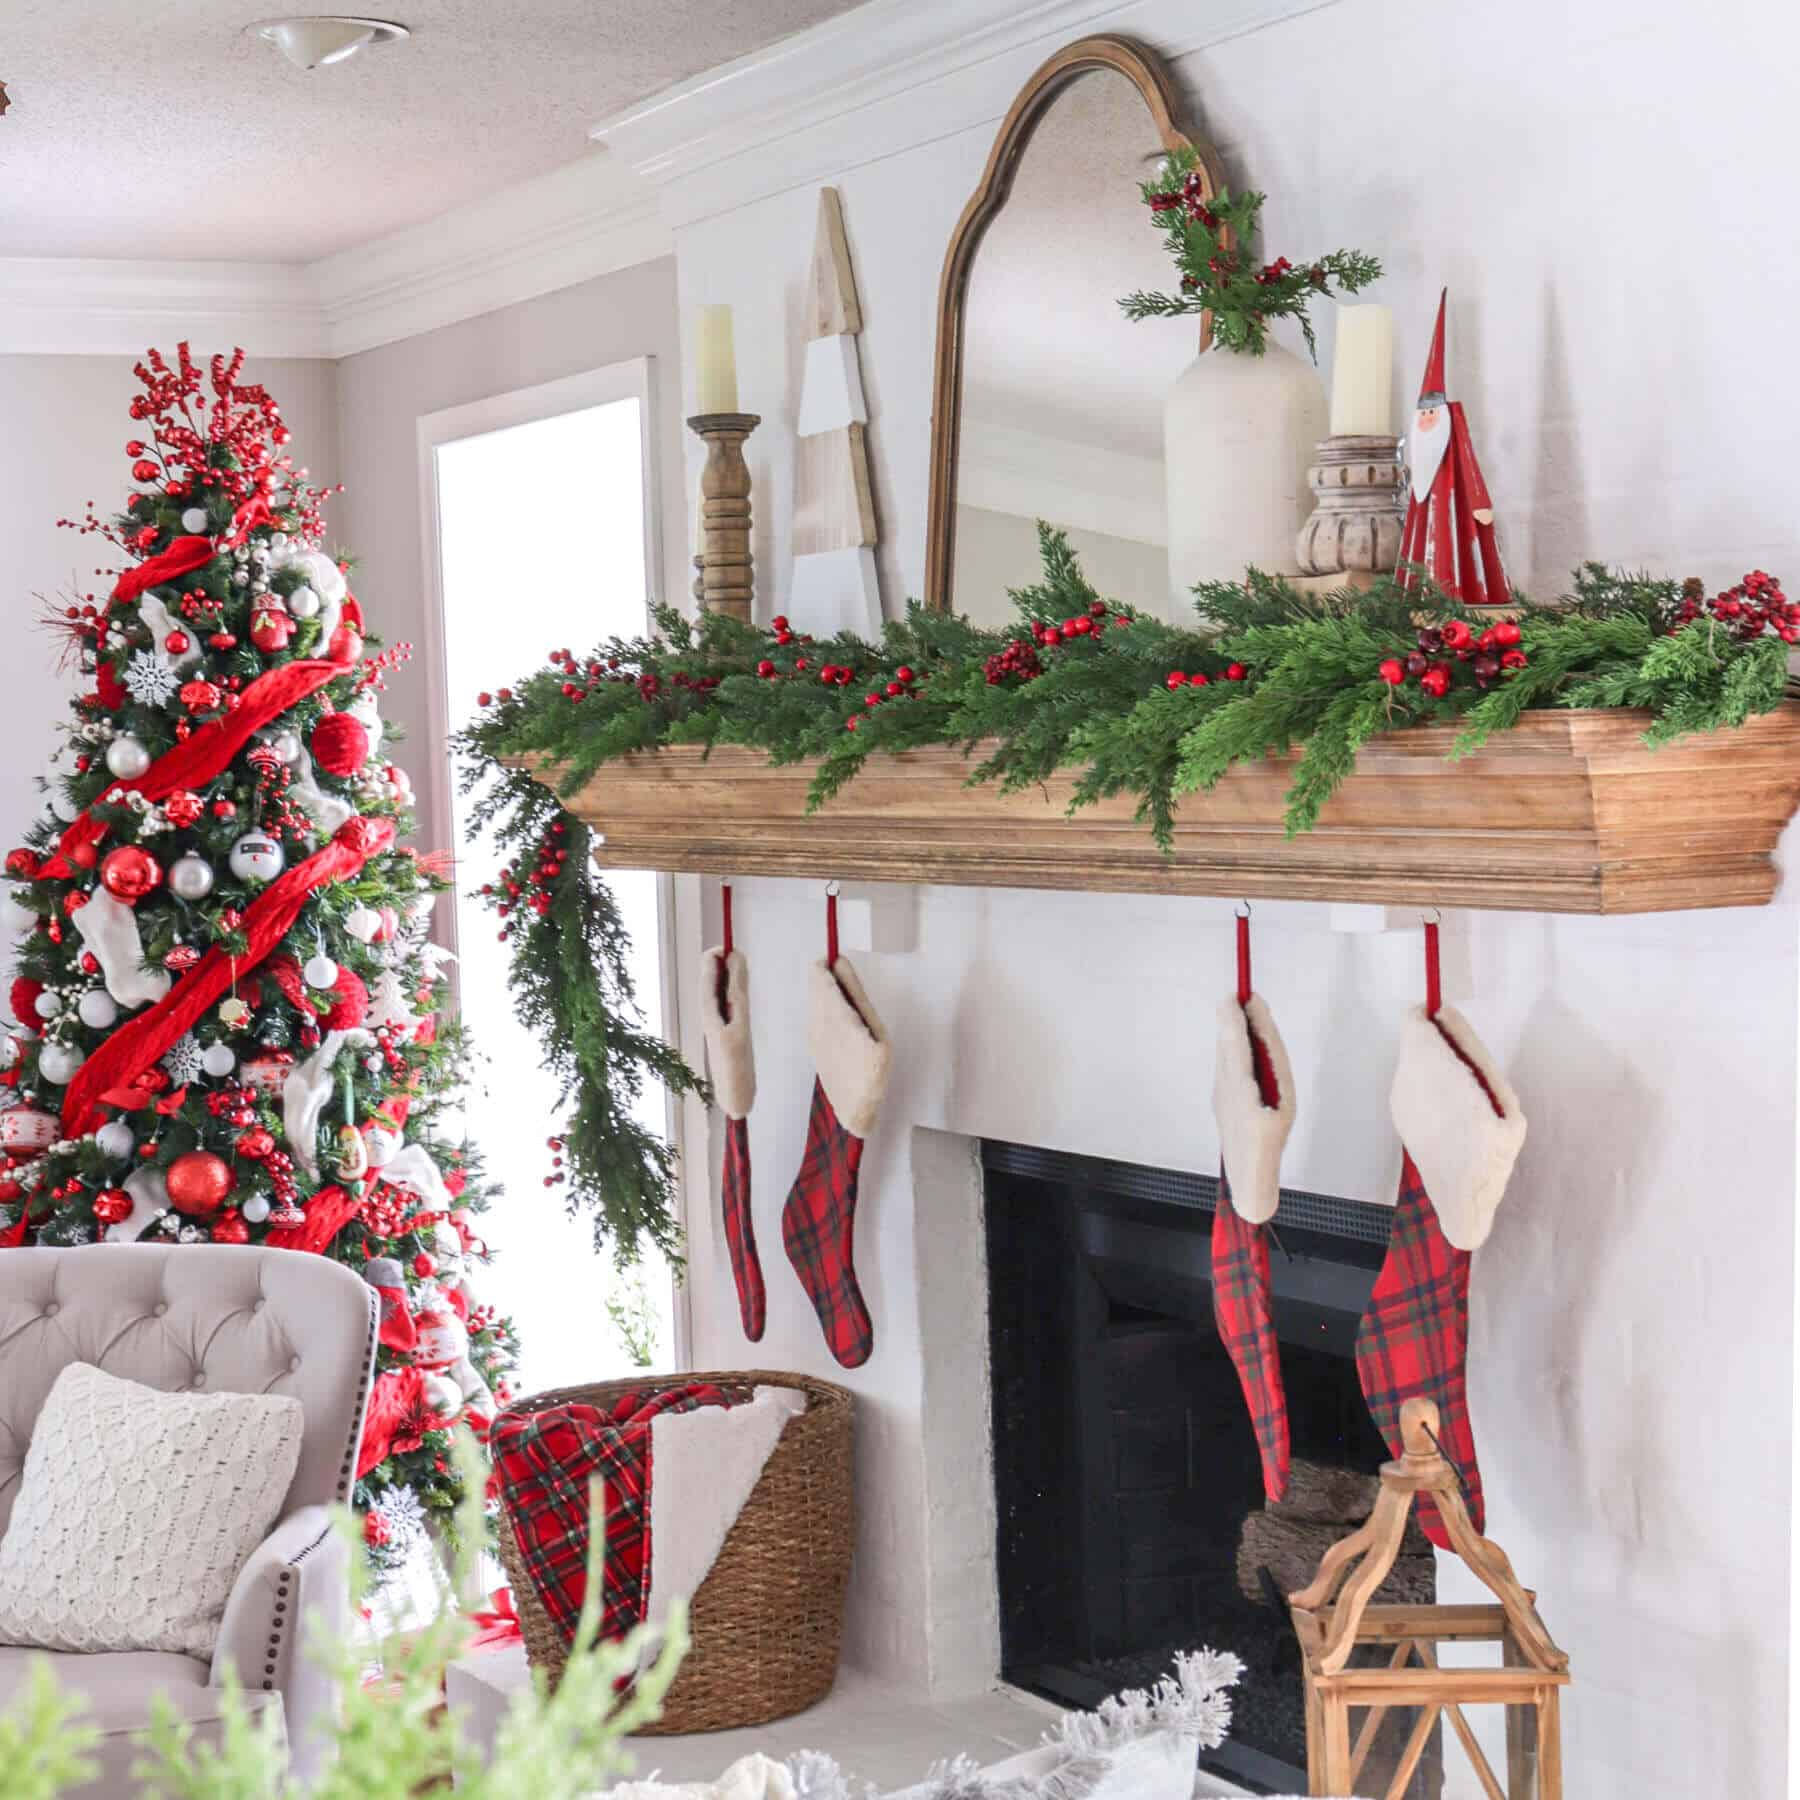 Christmas fireplace mantel decorated with red and white Christmas decorations and tartan plaid stockings